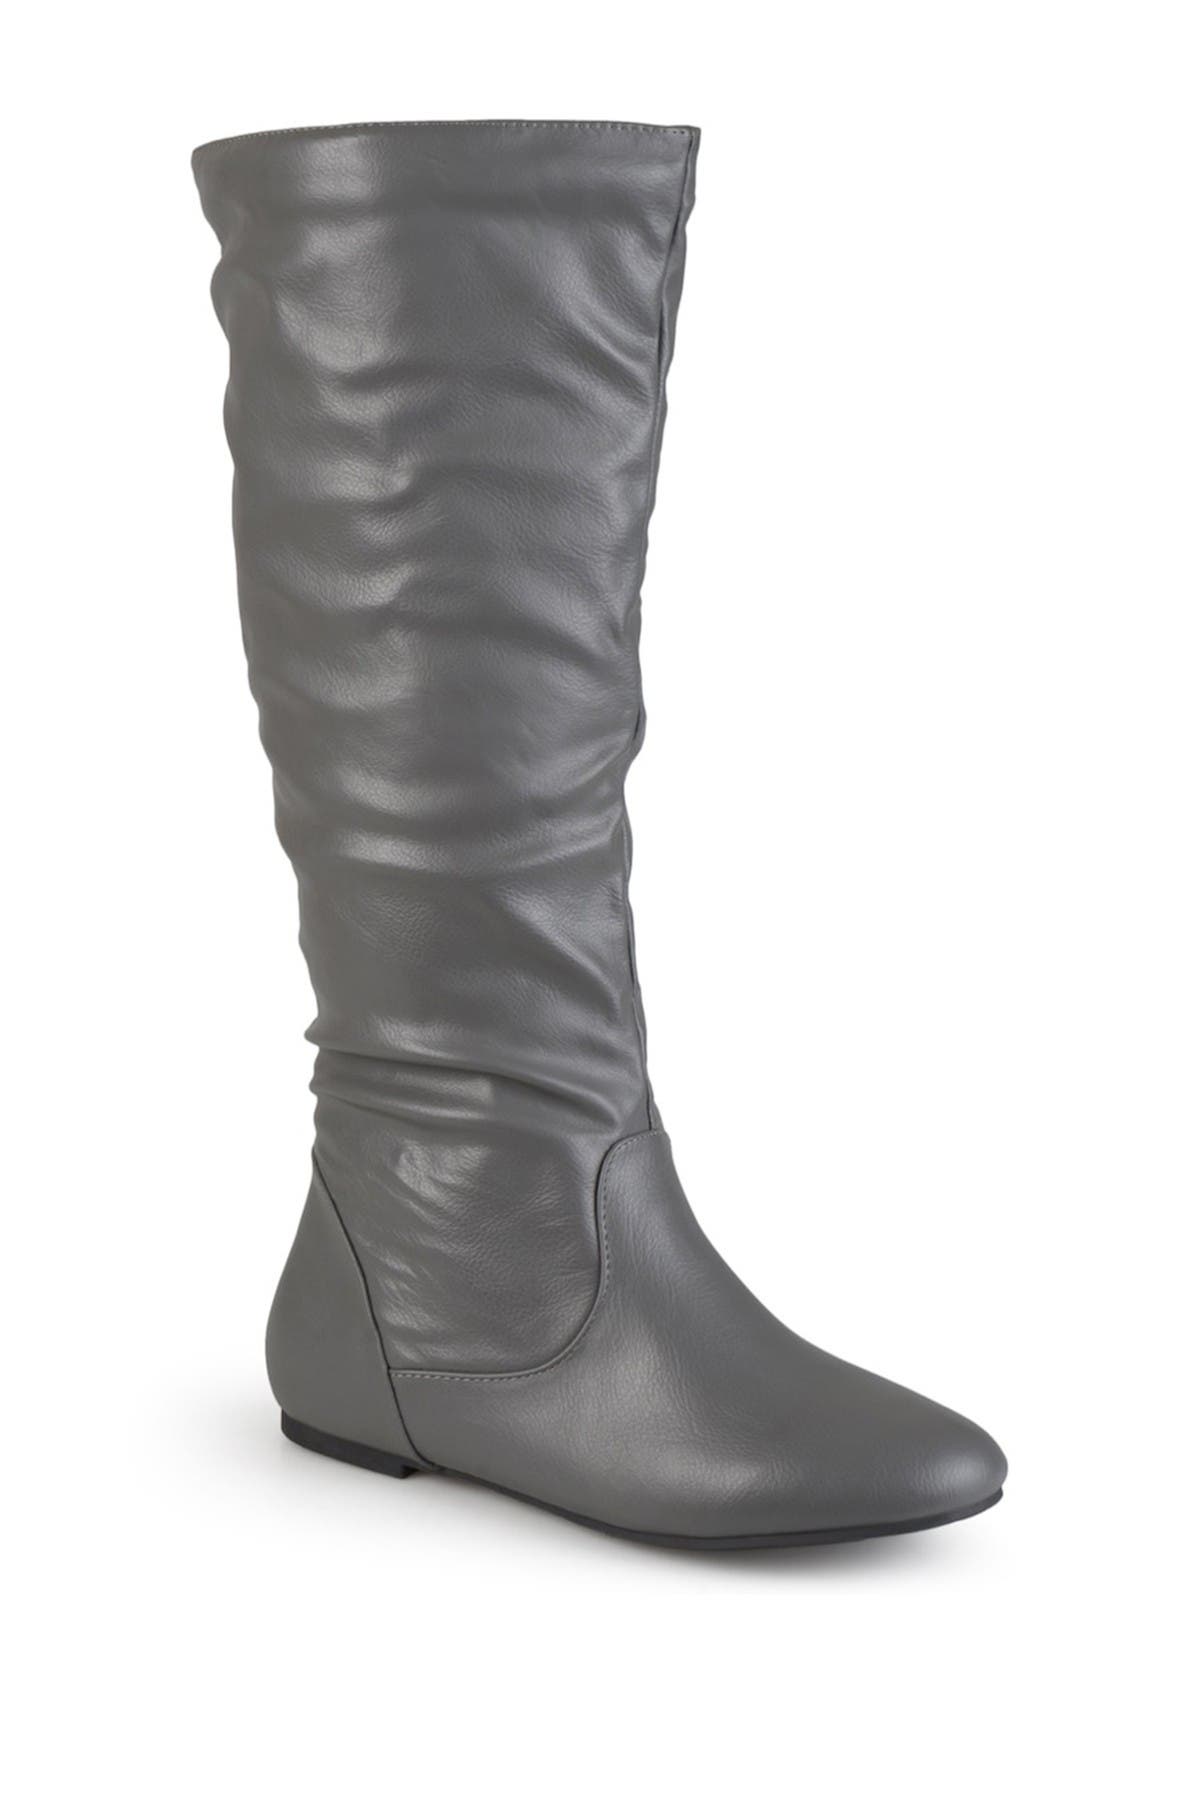 extra wide calf tall riding boots